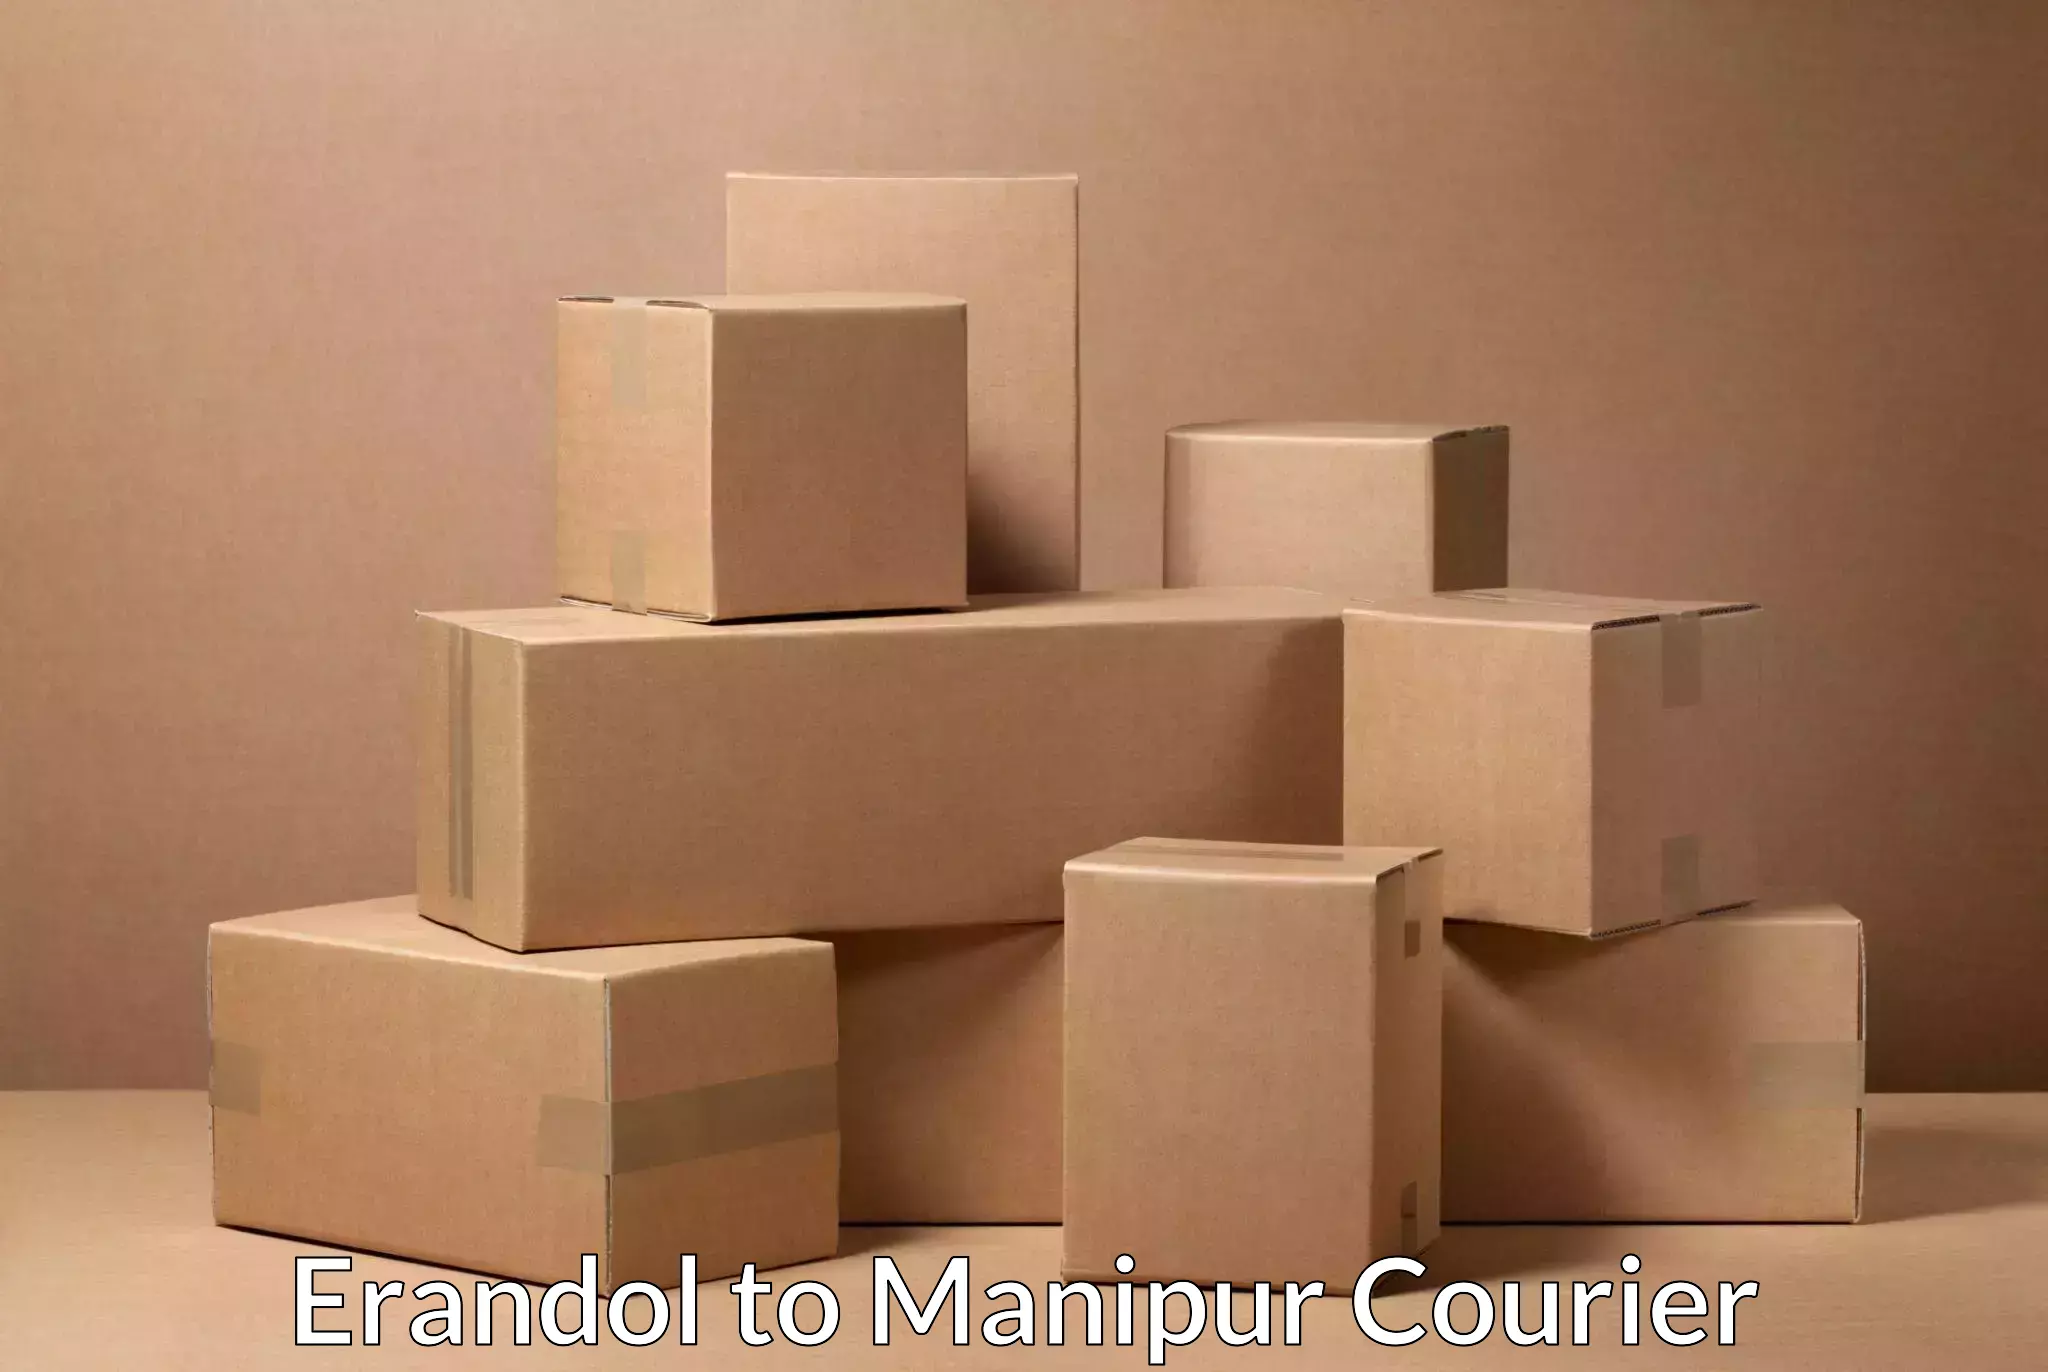 Subscription-based courier Erandol to Manipur